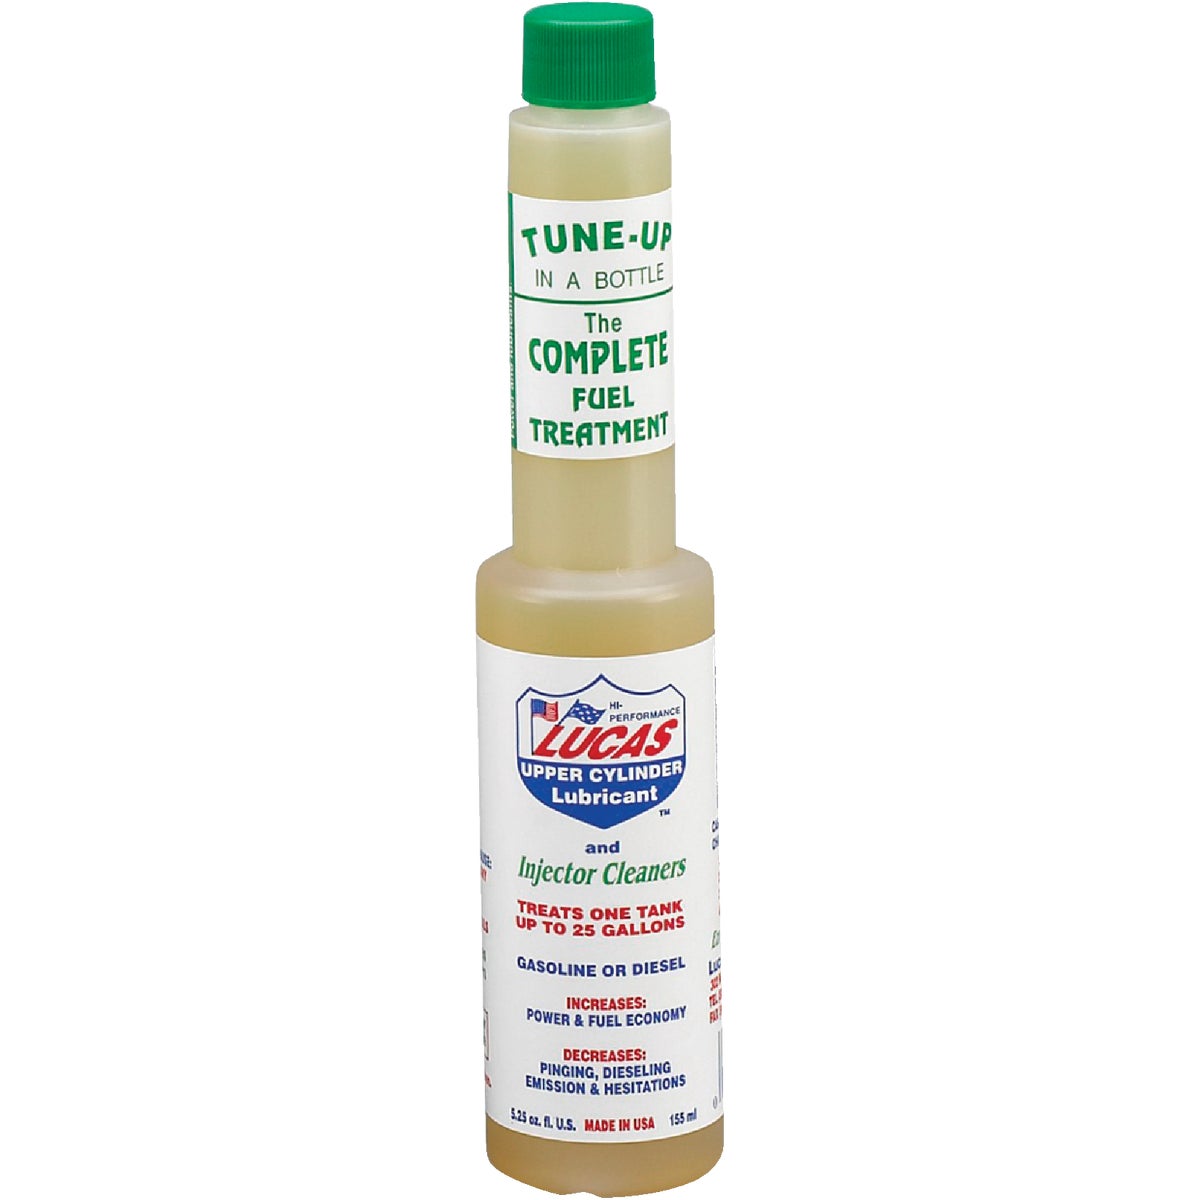 Item 570475, Lucas Fuel treatment is designed to increase power and fuel mileage and 